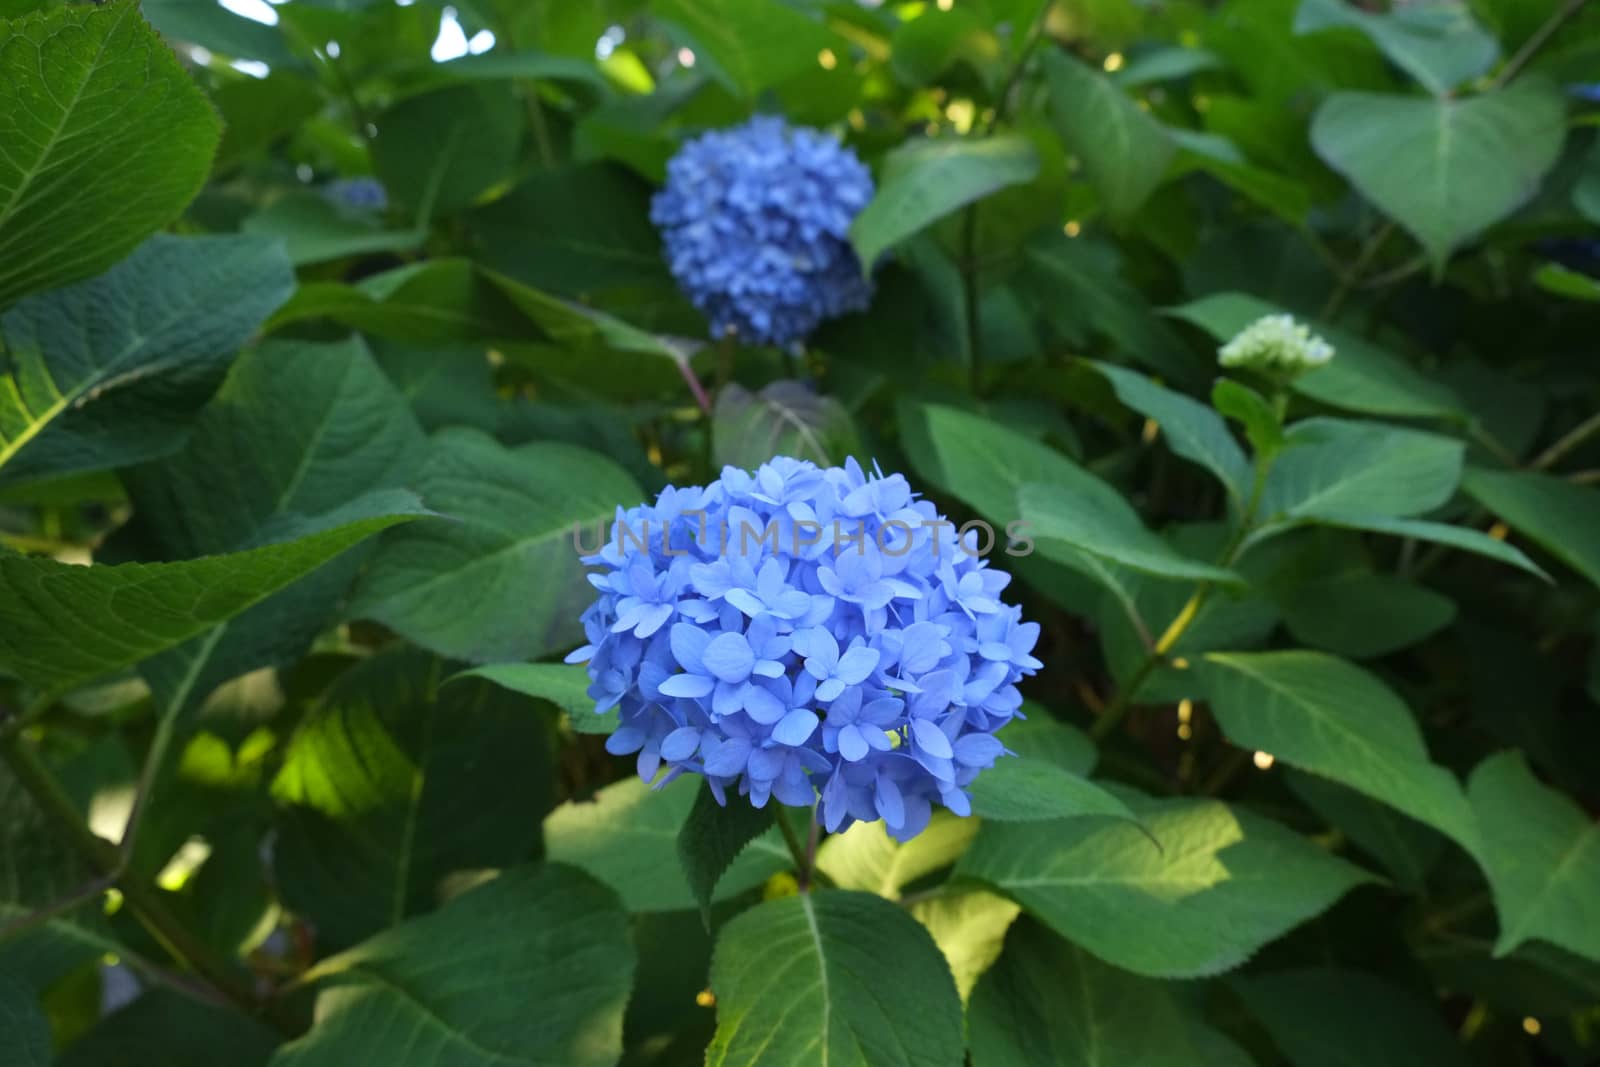 Blue hydrangea blossoms by mmm